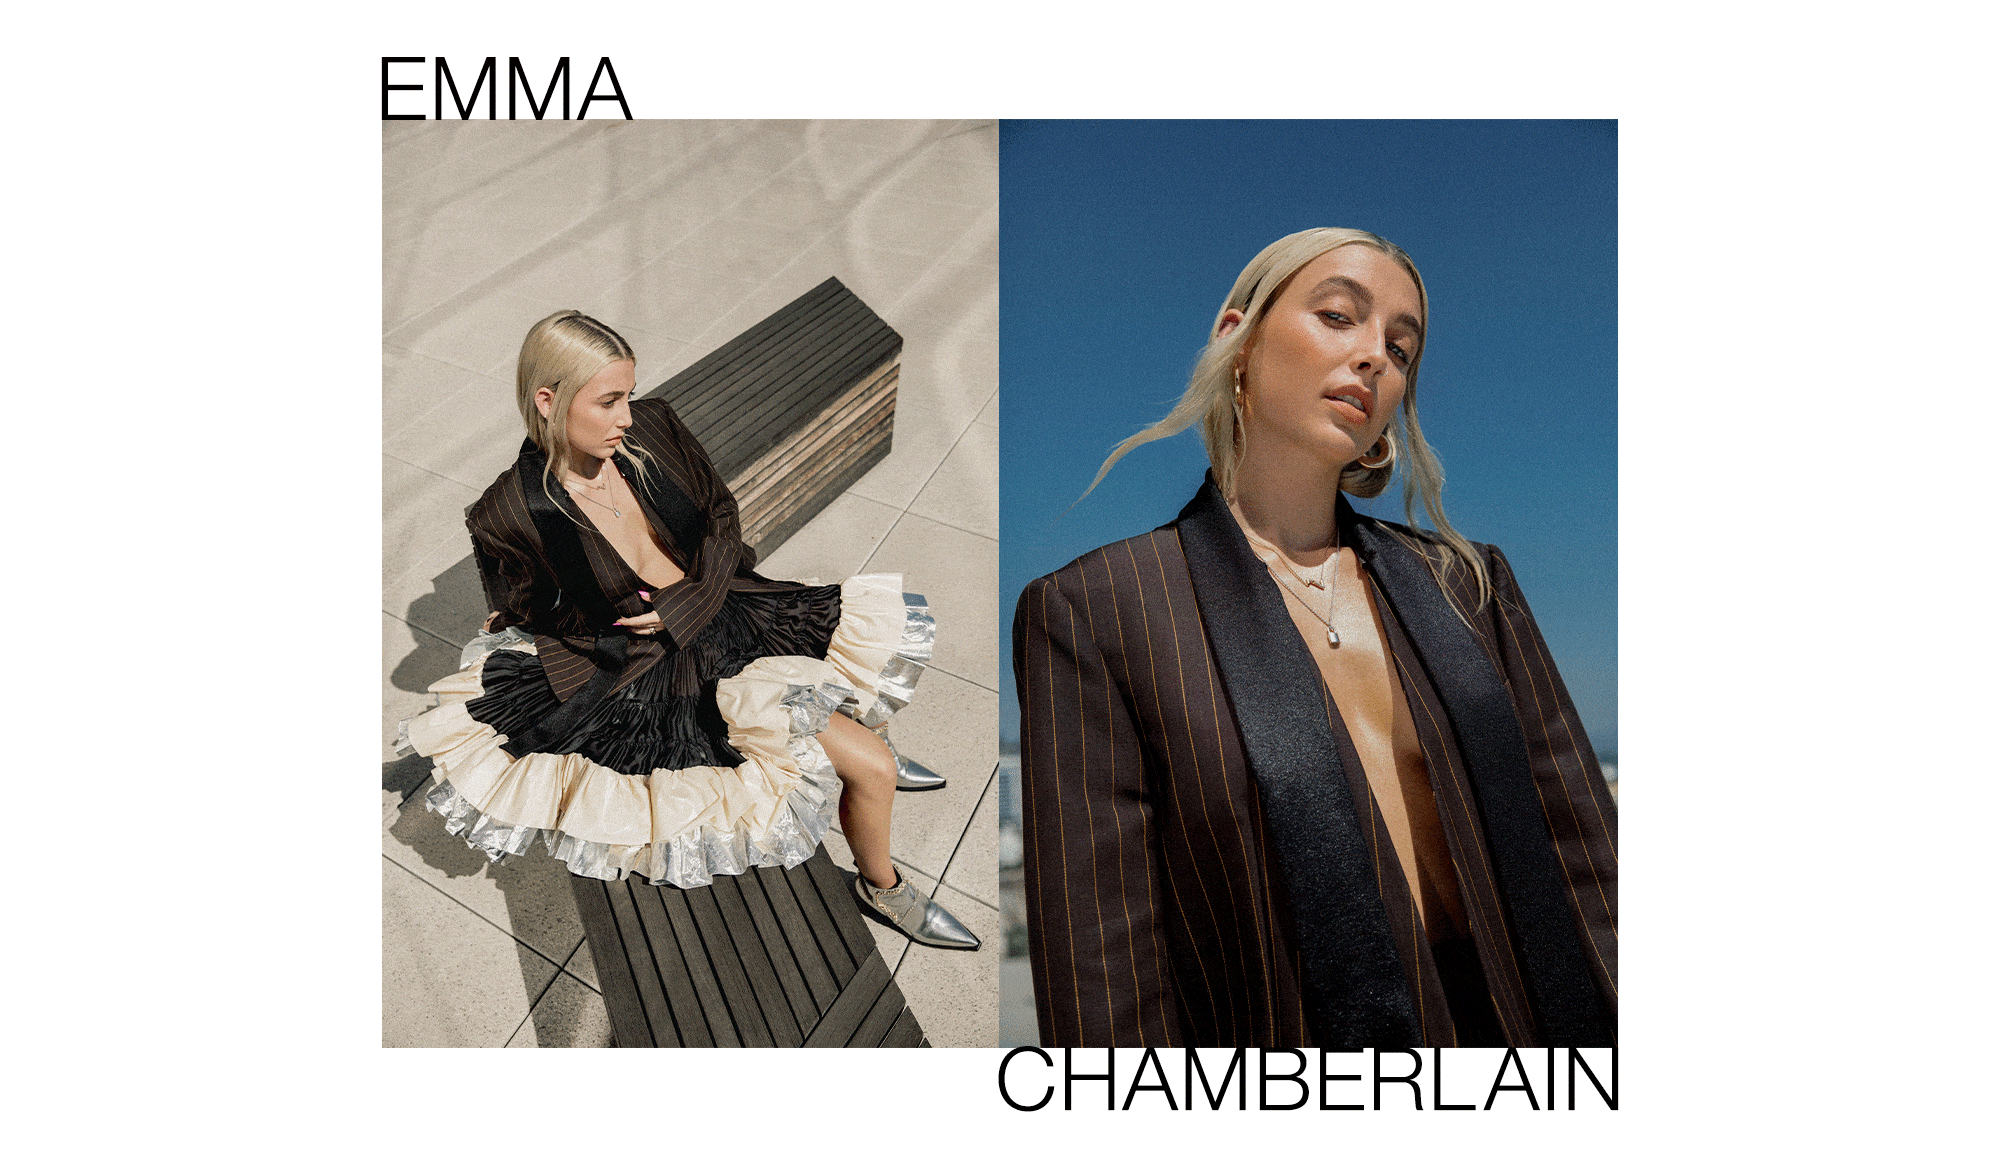 emma chamberlain: the real meaning of influence – a magazine